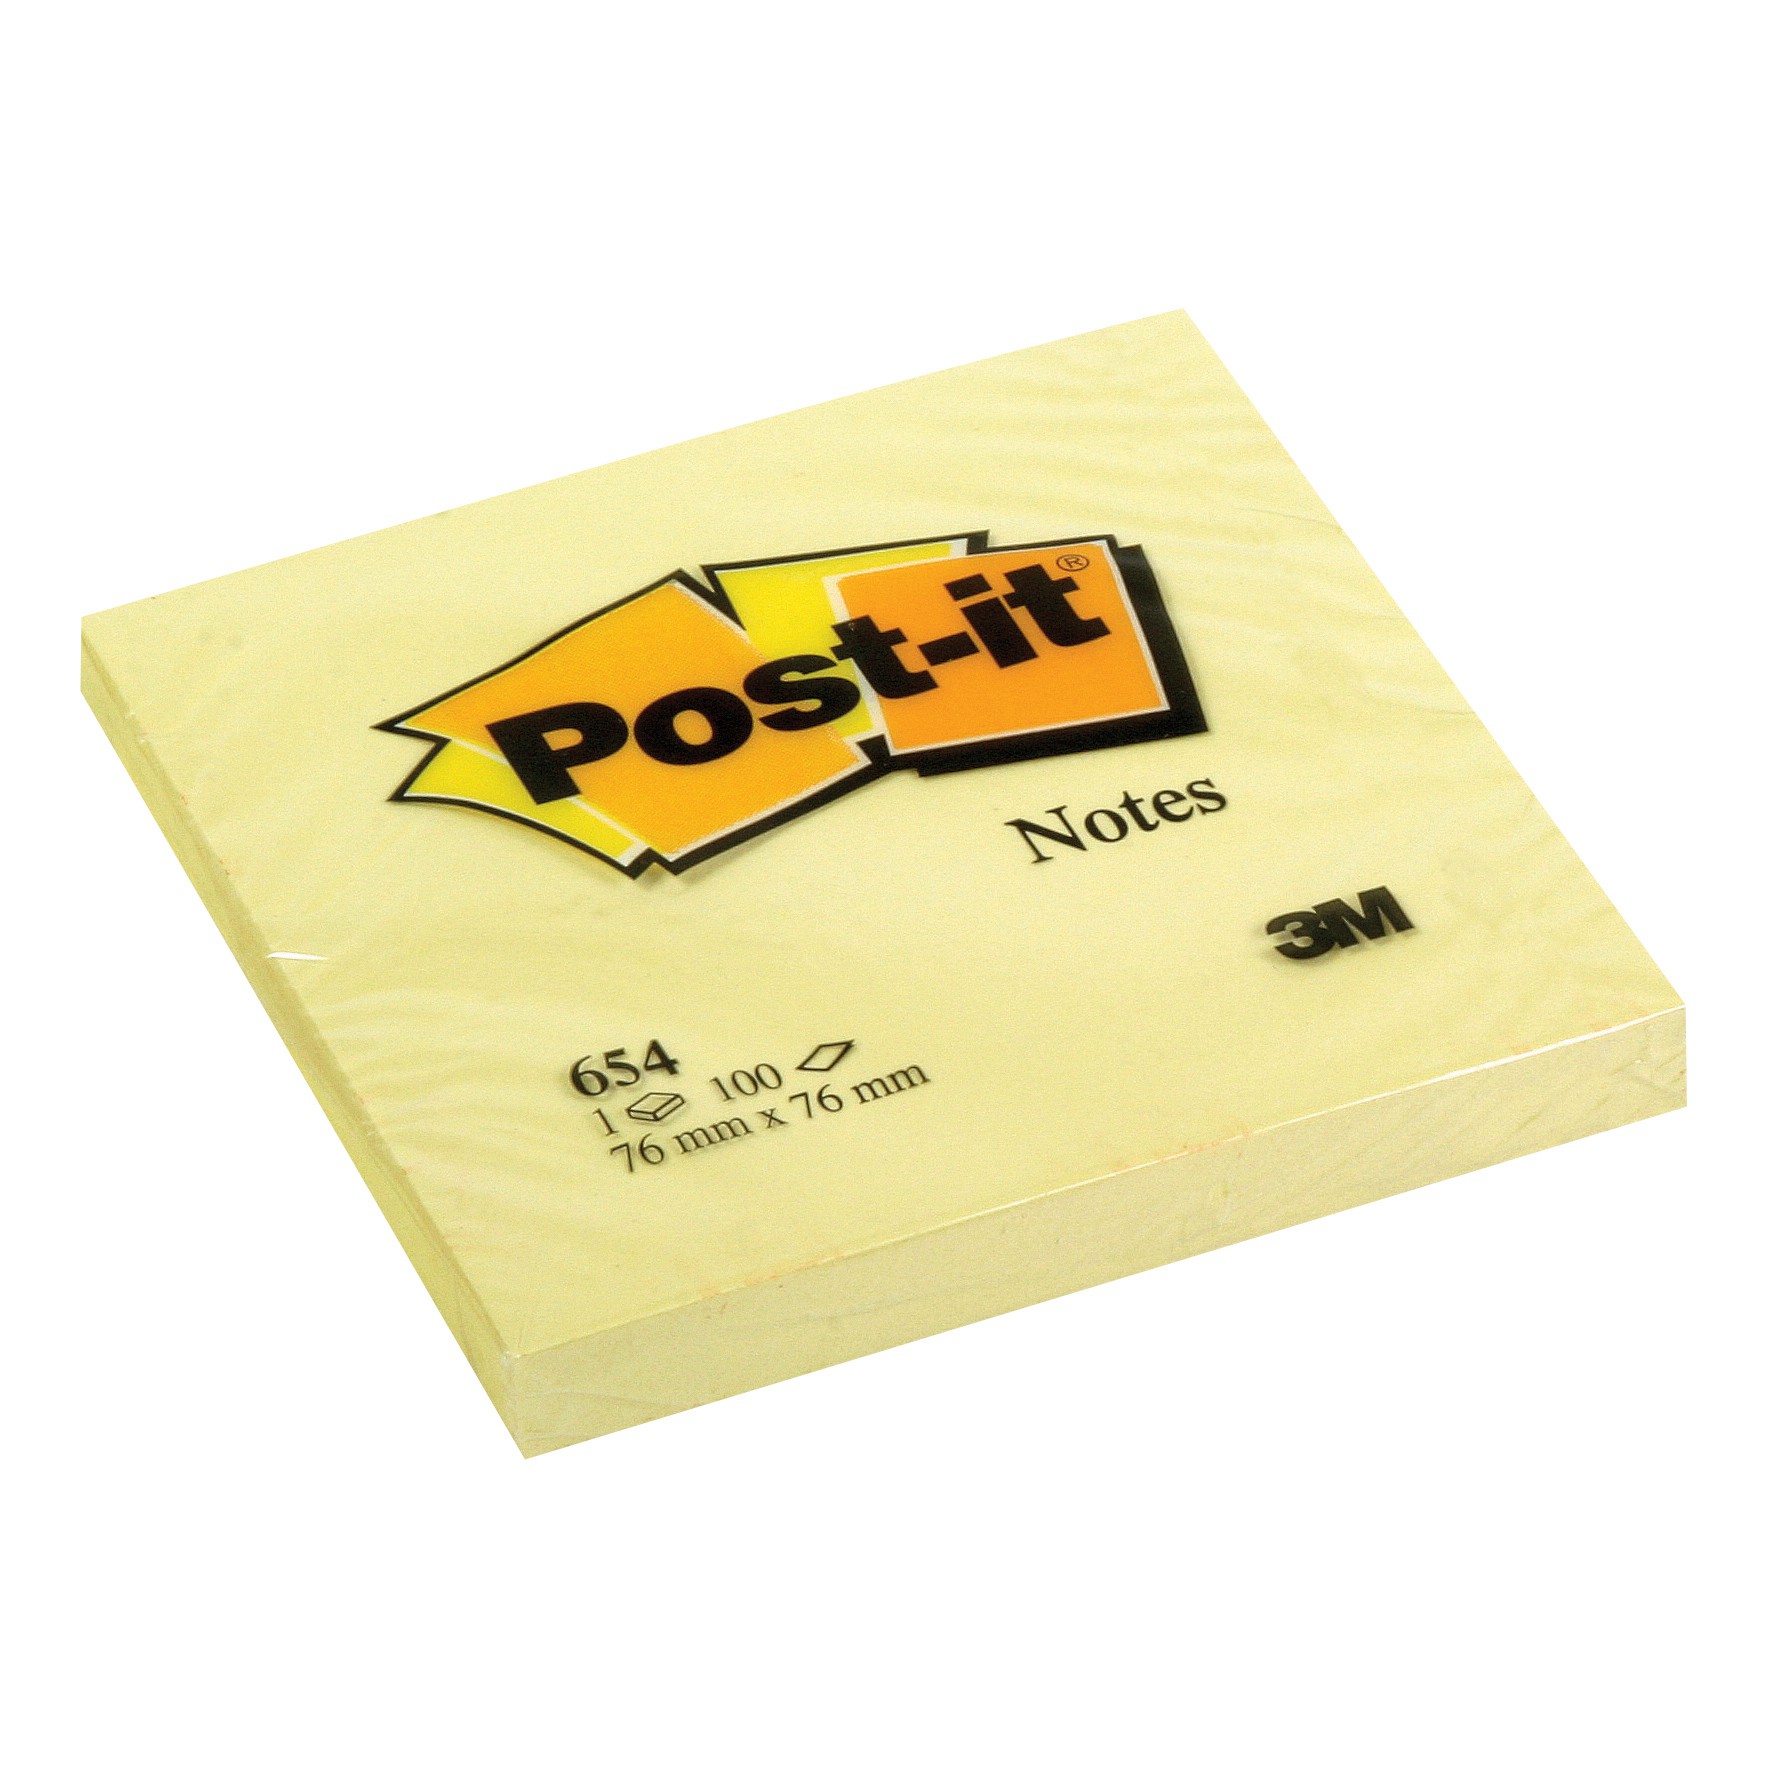 Post-it+Canary+Yellow+Notes+Pad+of+100+Sheets+76x76mm+Ref+654Y+Single+